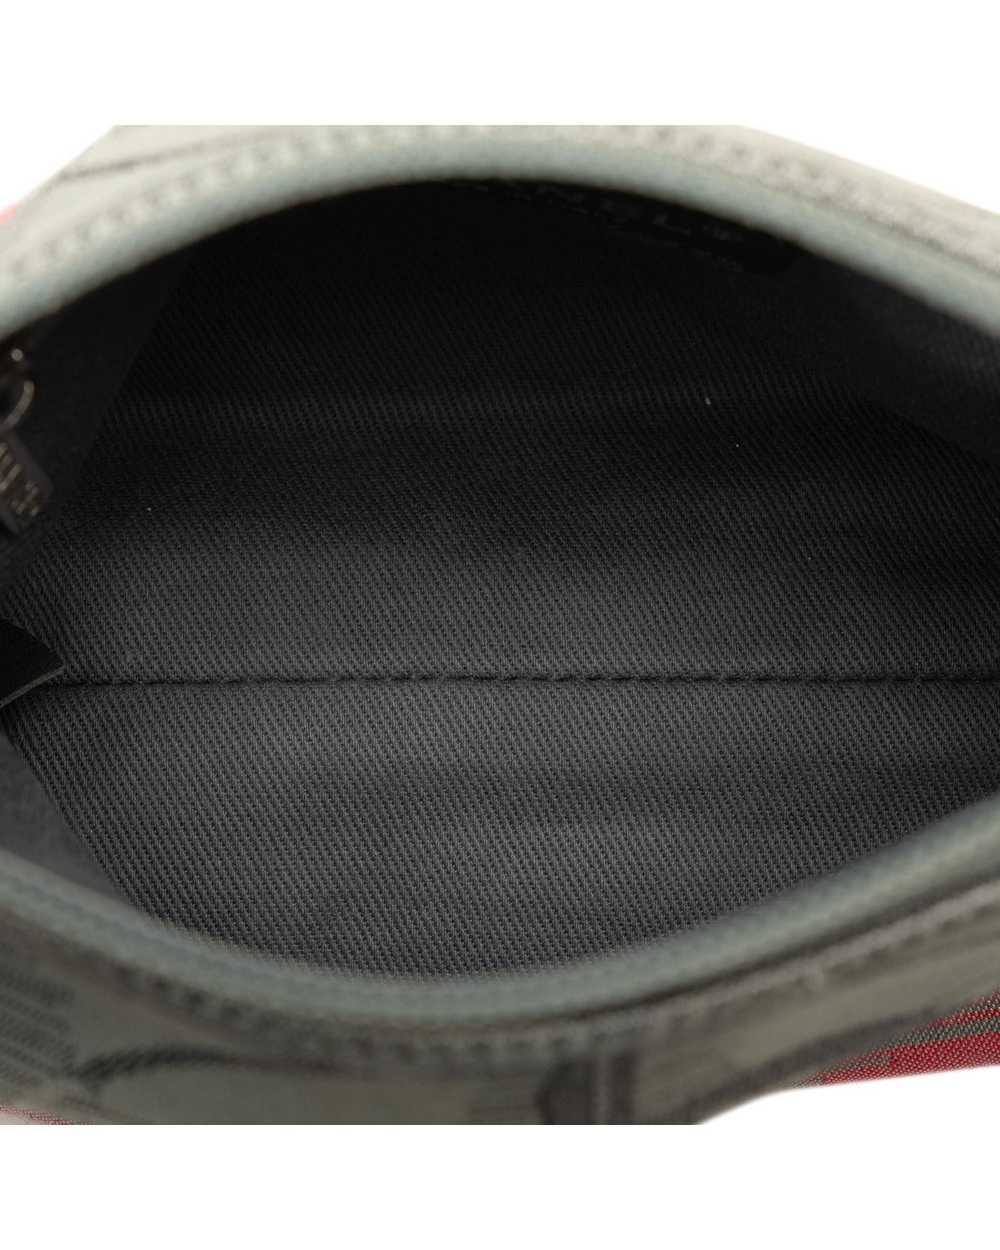 Chanel Black Nylon Zippered Pouch - image 5